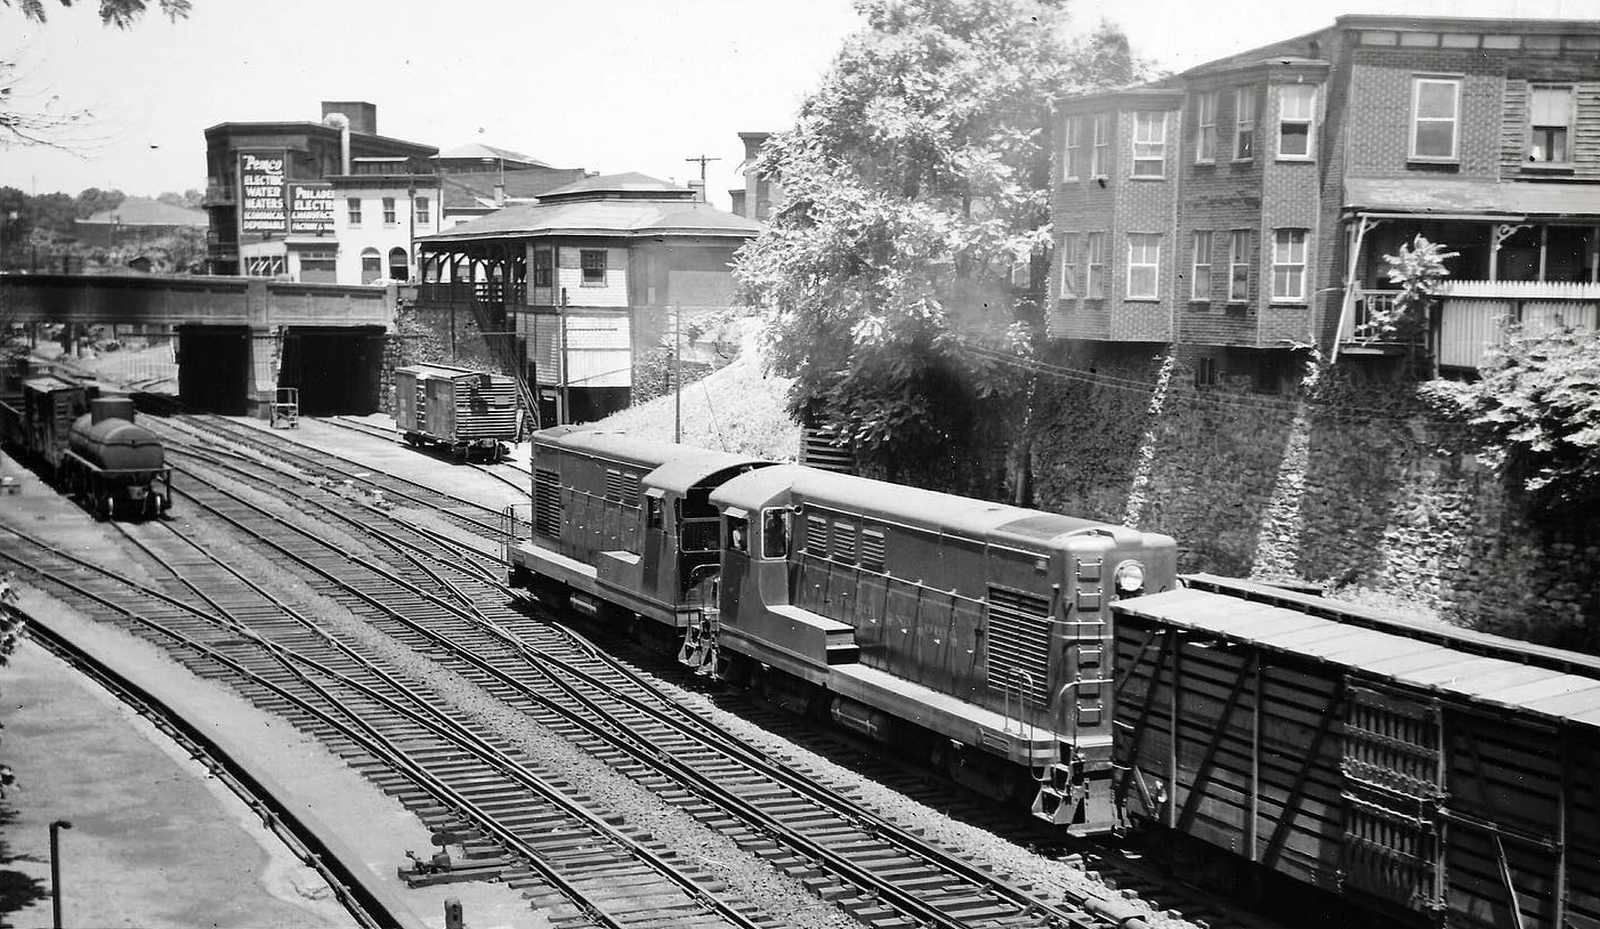 Two H-10-44s with a freight train in Philadelphia in June 1950